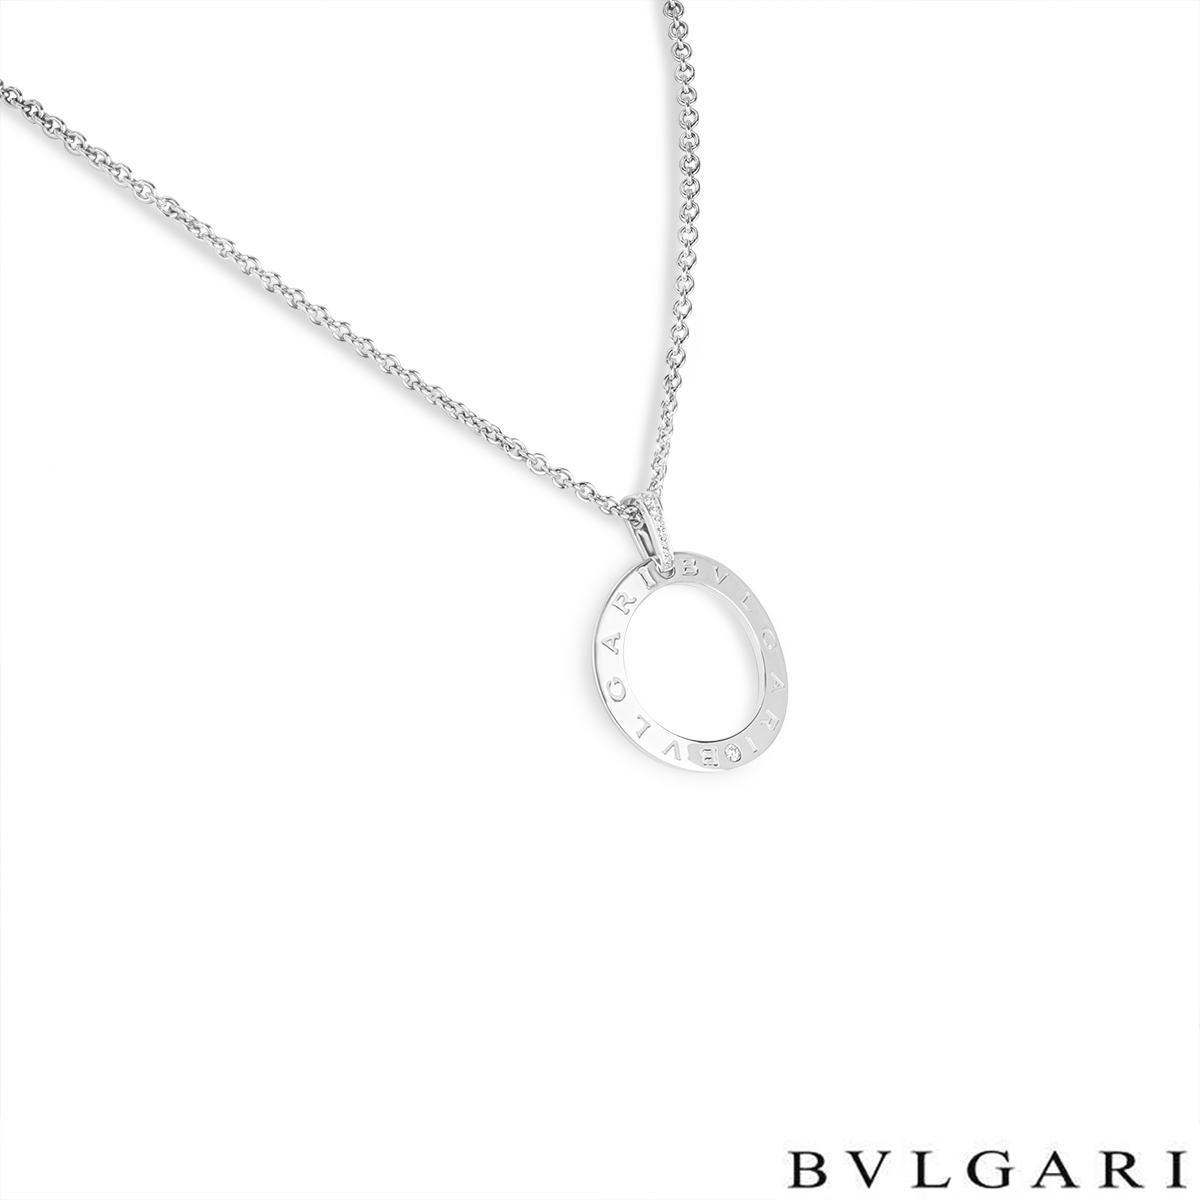 A beautiful 18k white gold pendant by Bulgari from the Bvlgari Bvlgari collection. The pendant features a circular openwork motif engraved 'Bvlgari Bvlgari' around the outer edge separated by a single set diamond and a pave diamond set bail. The 10